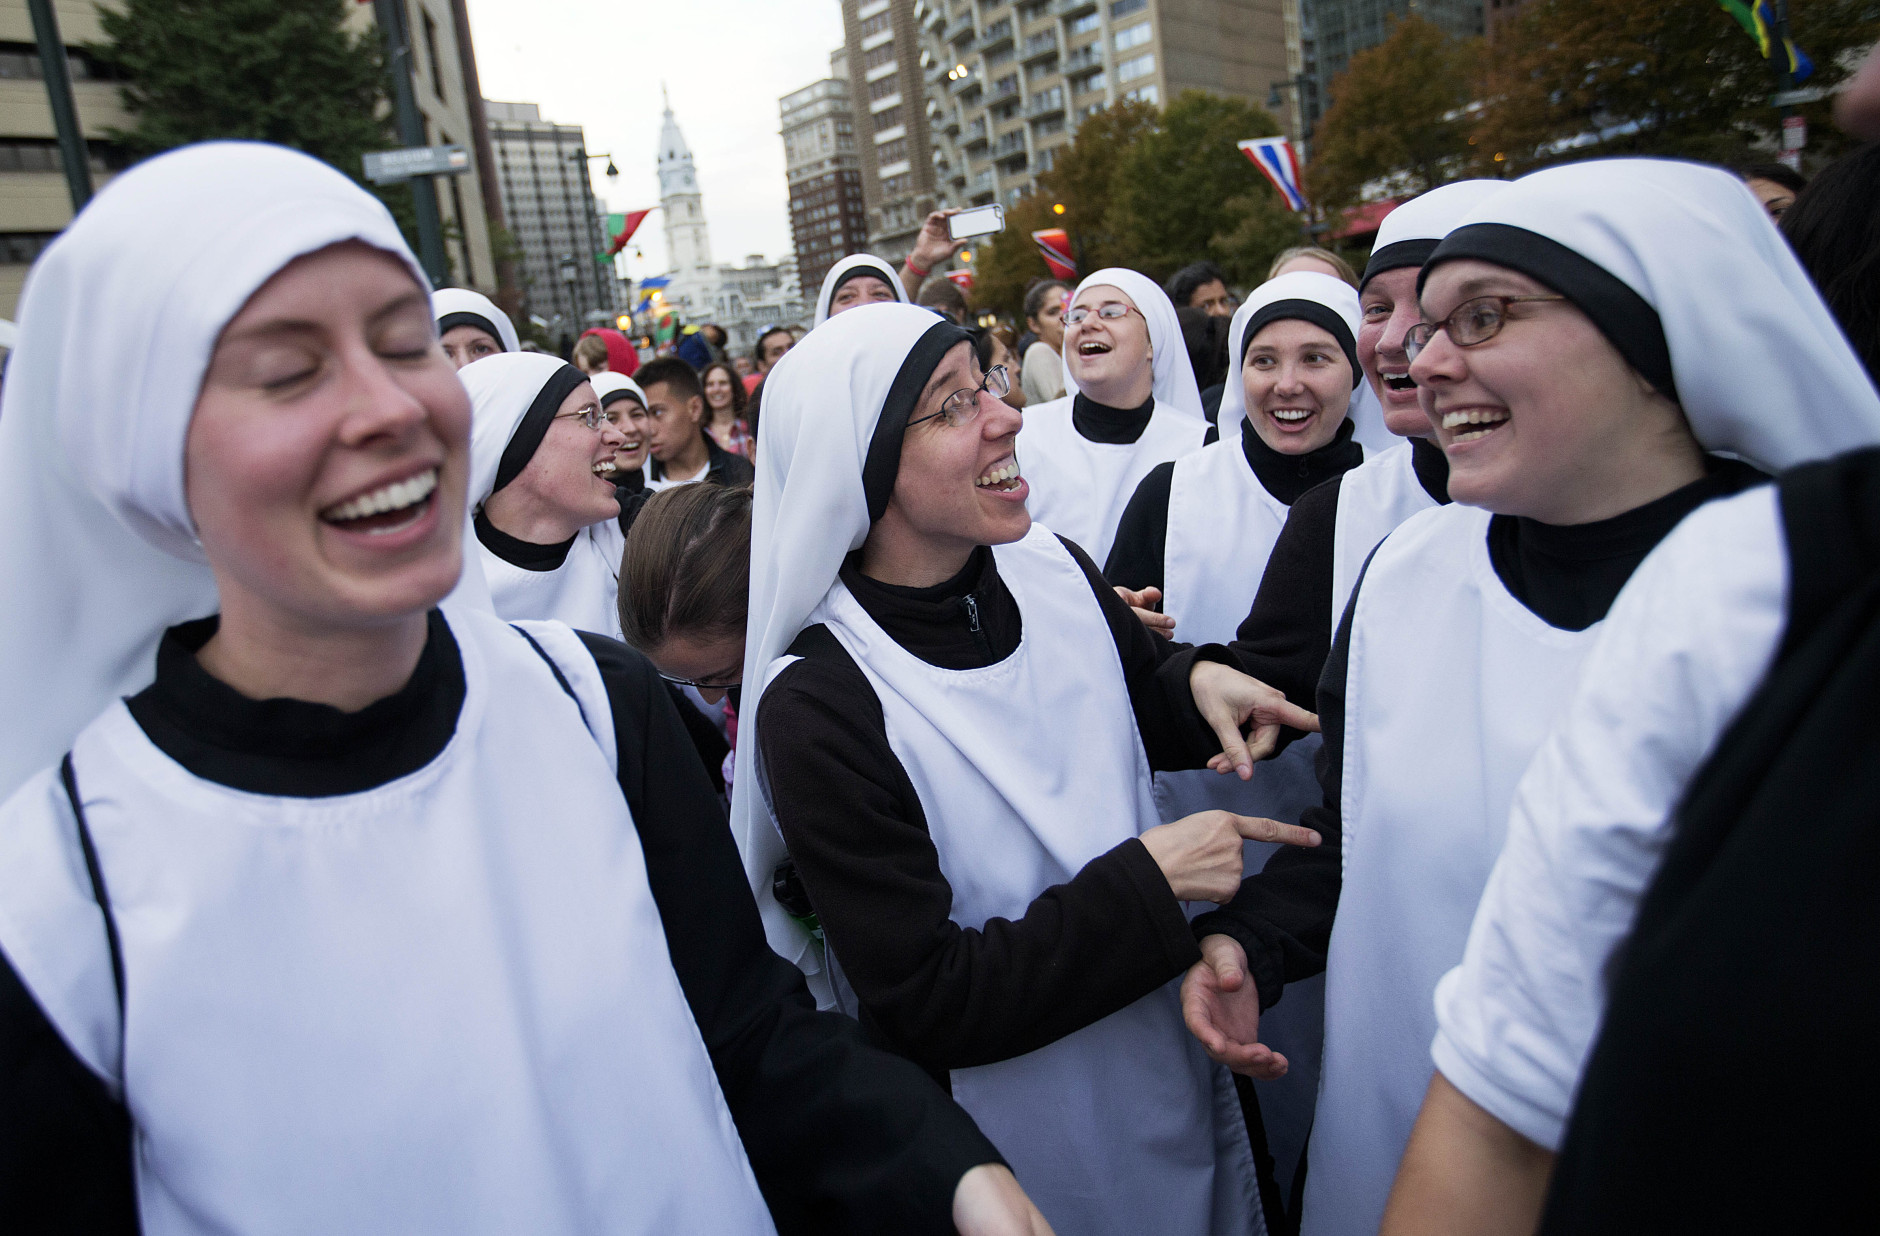 CORRECTS TO HANDMAIDS OF THE HEART OF JESUS FROM HANDMADE AT THE HEART OF JESUS- Sisters with Handmaids of the Heart of Jesus, out of New Ulm, Minn., sing along to music as they wait for a parade with Pope Francis to start along Benjamin Franklin Parkway Saturday, Sept. 26, 2015, in Philadelphia. (AP Photo/David Goldman)